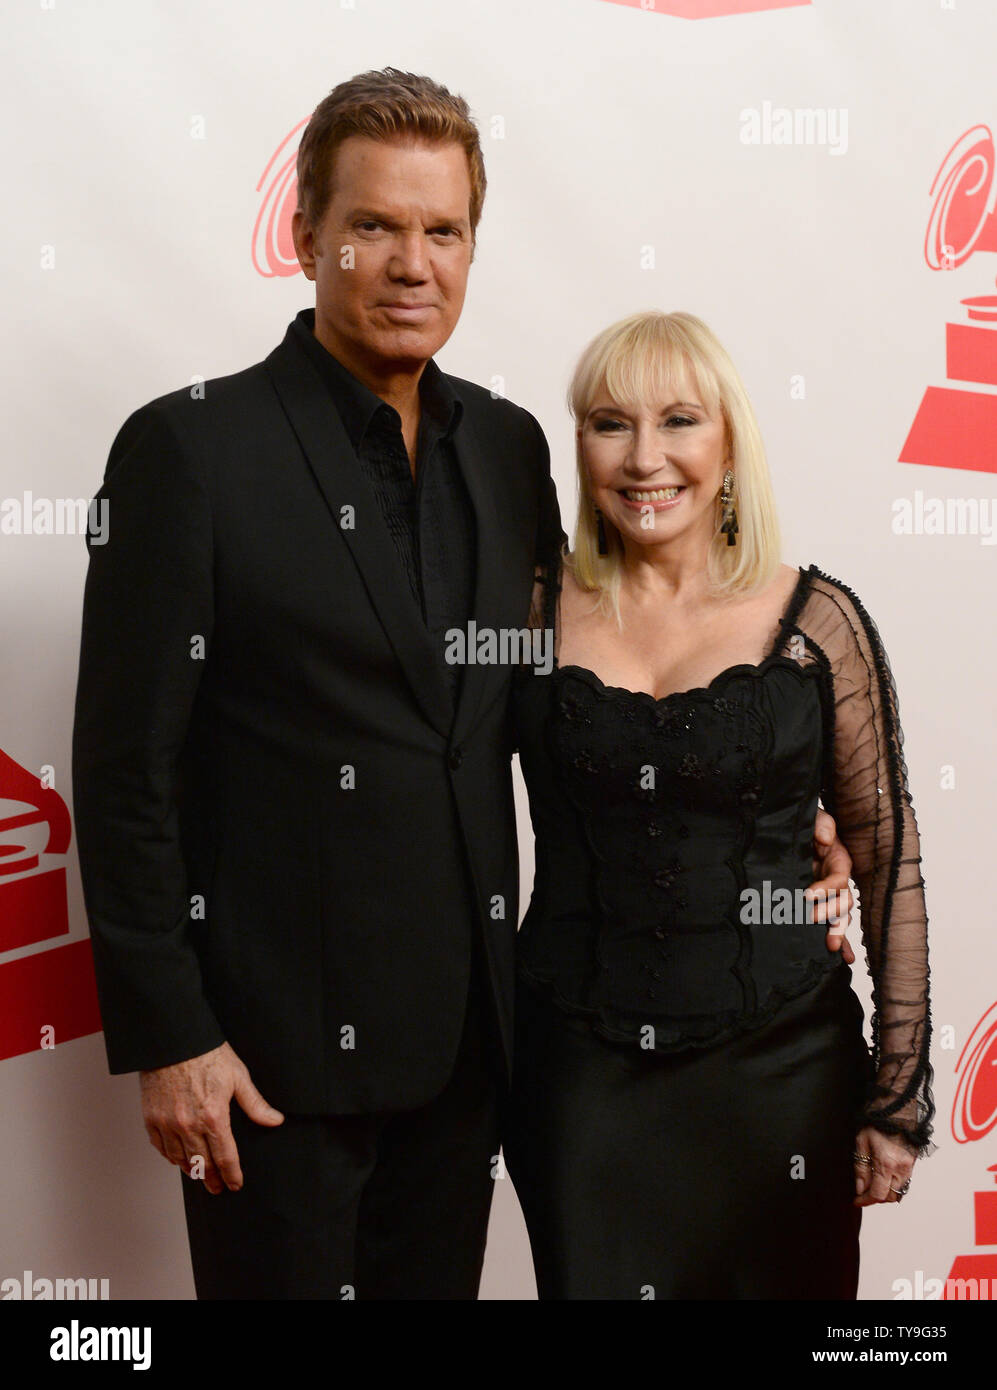 Willy Chirino, left, and Lissette arrive at the Latin Recording Academy Person of the Year tribute to Joan Manuel Serrat at the Mandalay Bay Events Center in Las Vegas, Nevada on November 19, 2014. UPI/Jim Ruymen Stock Photo